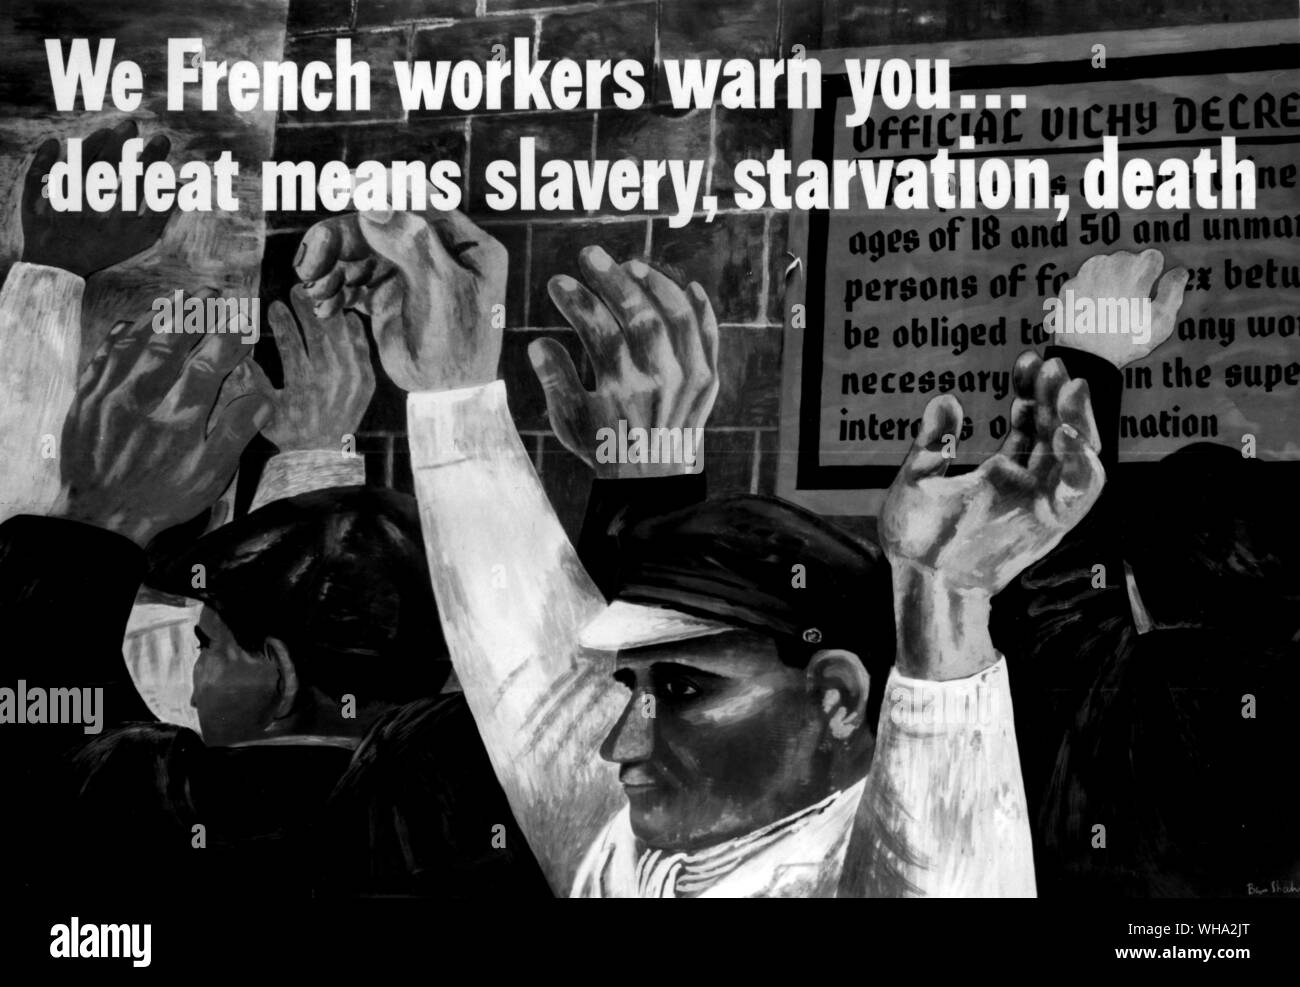 WW2: 'We French Workers warn you... defeat means slavery, stravation, death' French war poster. Stock Photo